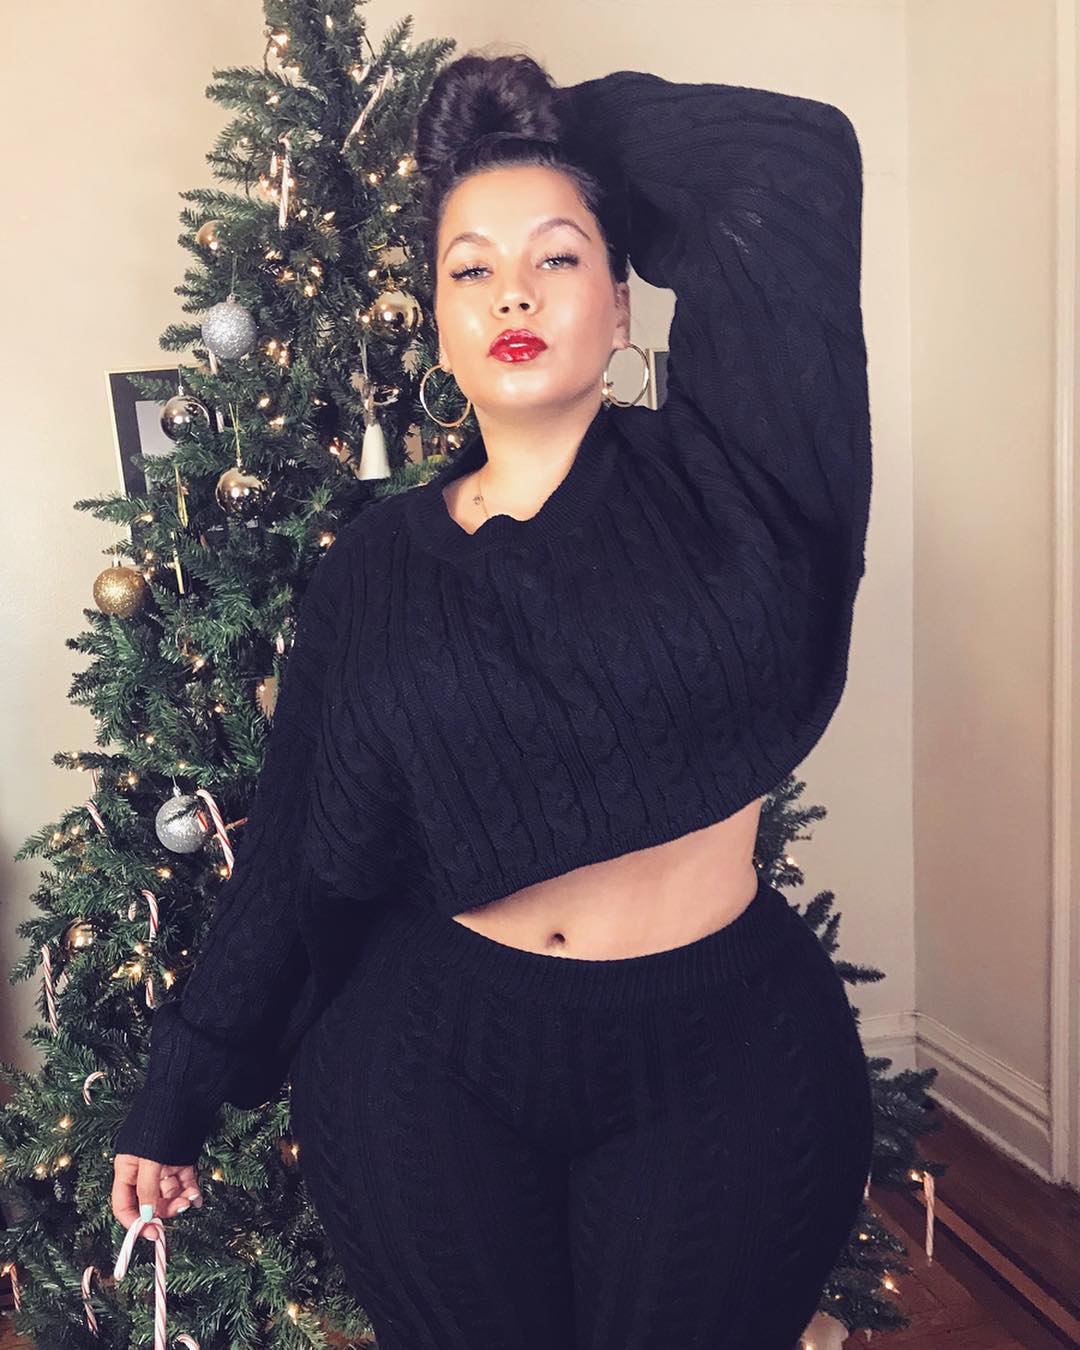 This beauty allhailkingsteph is always elegant curvy models for you. 